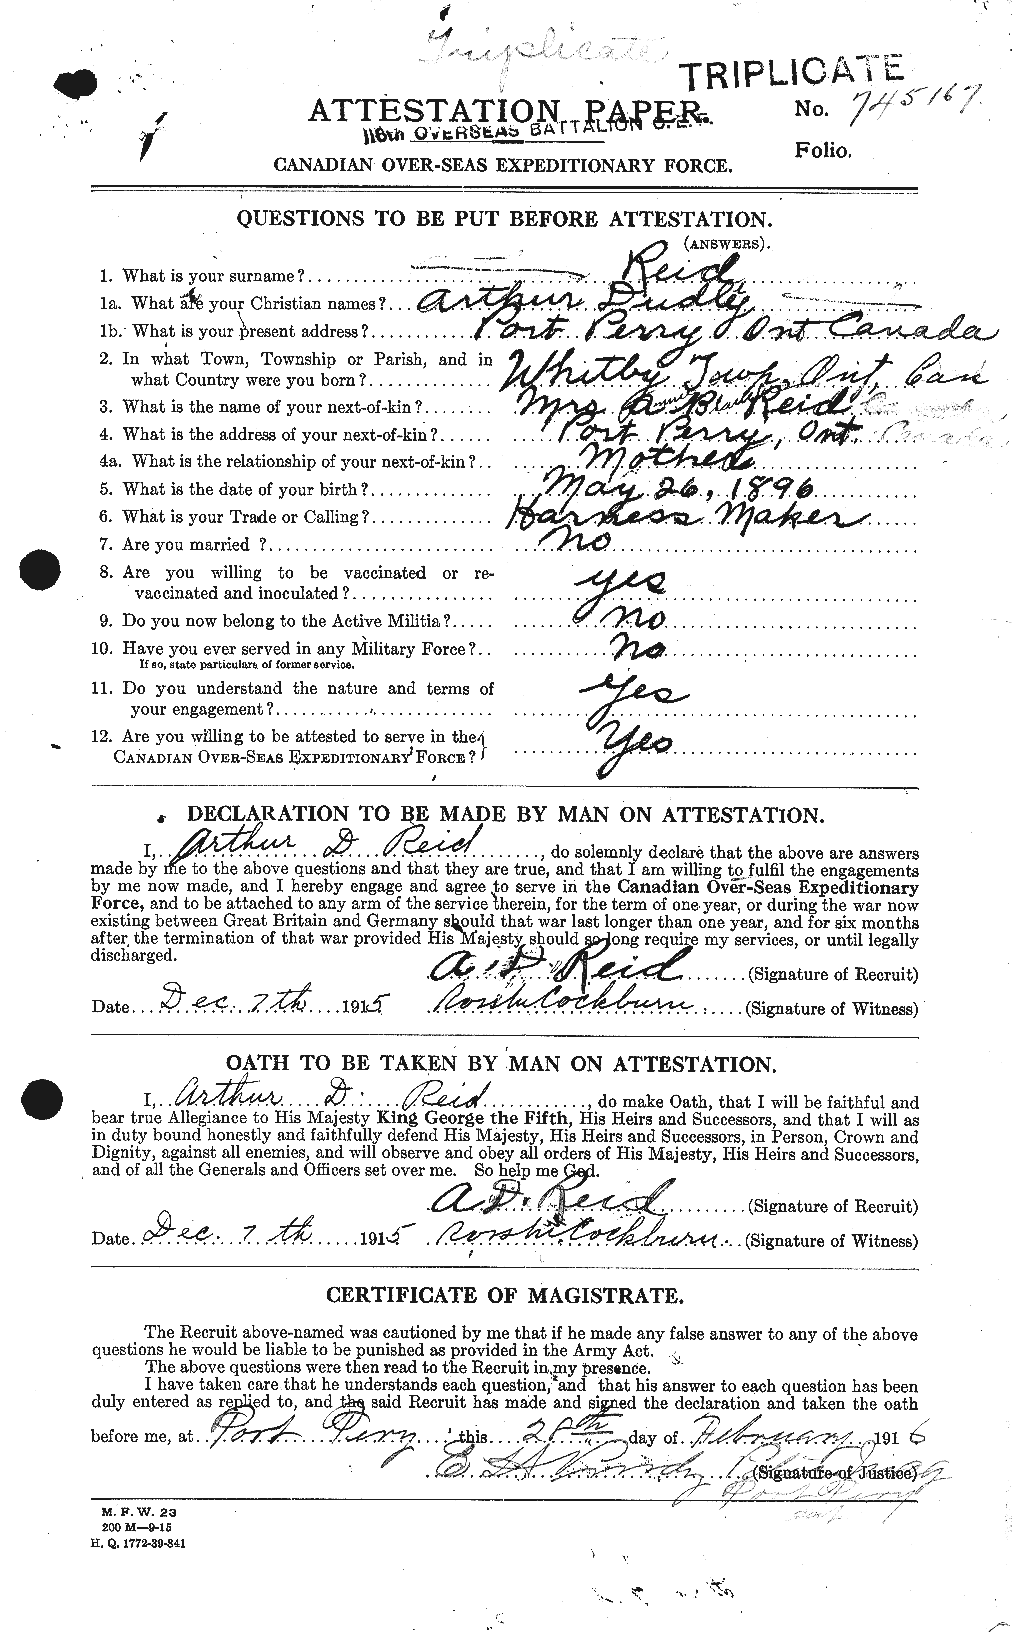 Personnel Records of the First World War - CEF 597840a